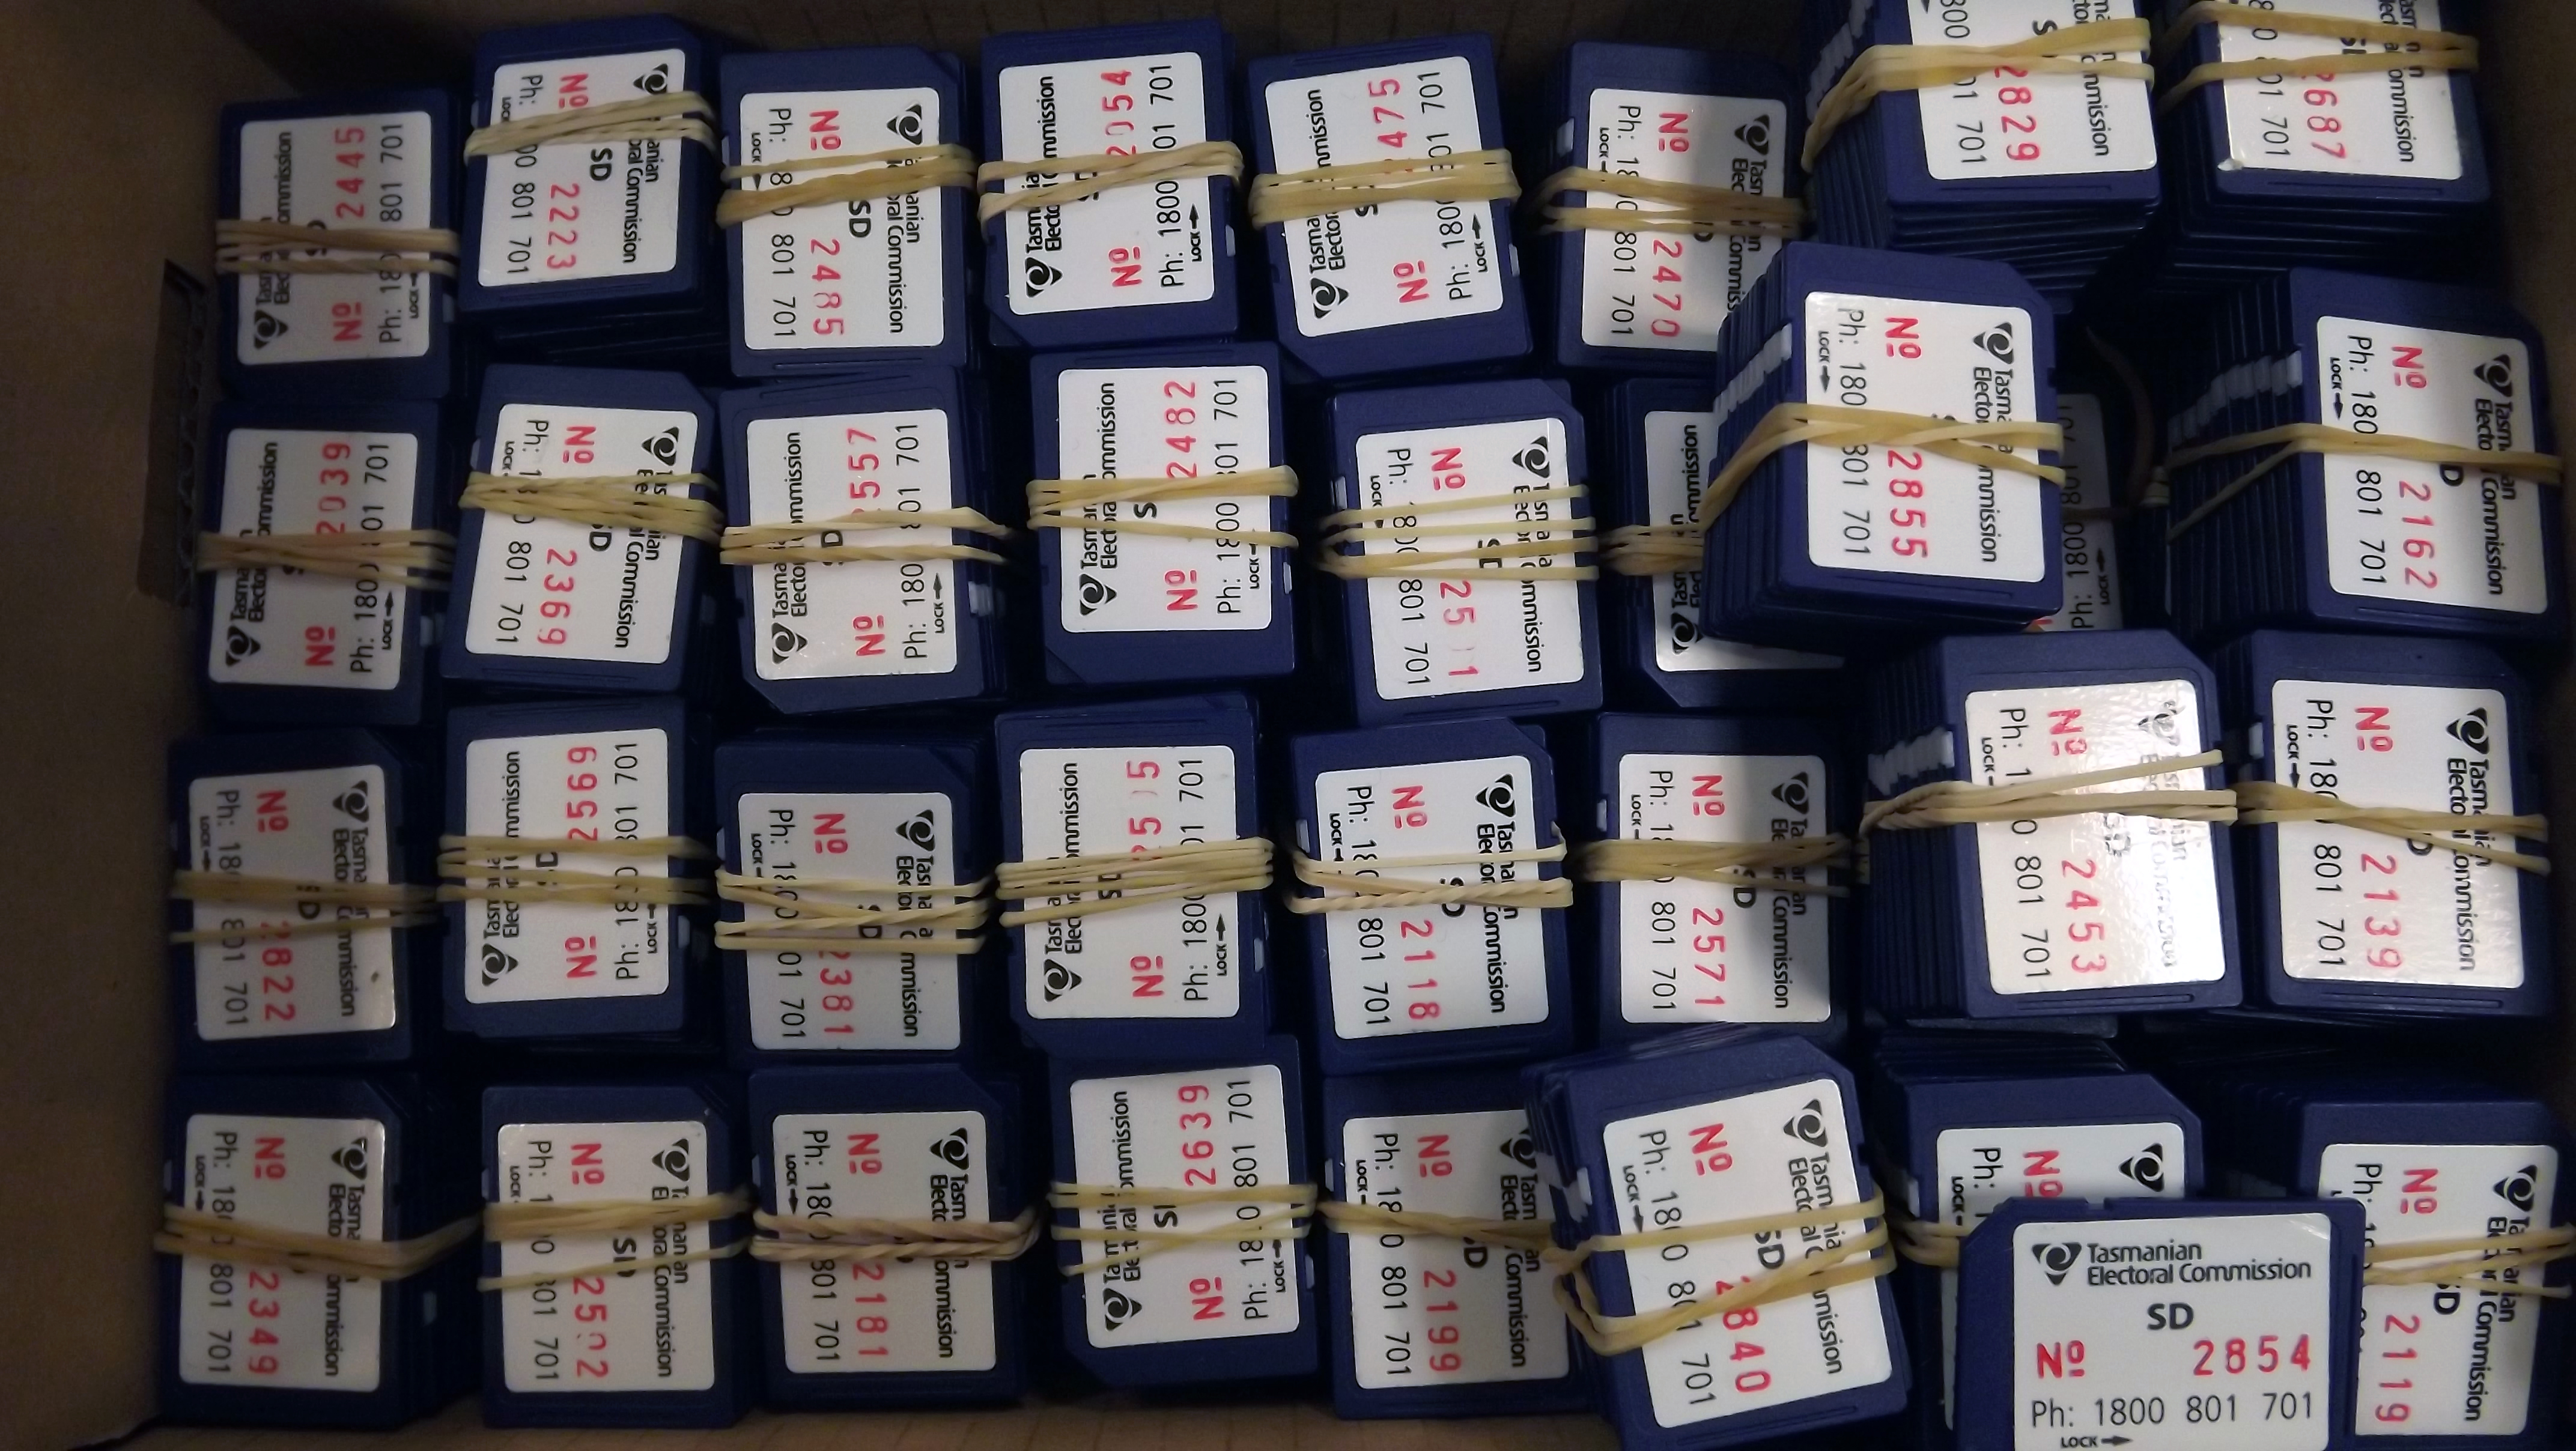 Bundles of SD memory cards that were used in Netbook computers to save rolls of voters